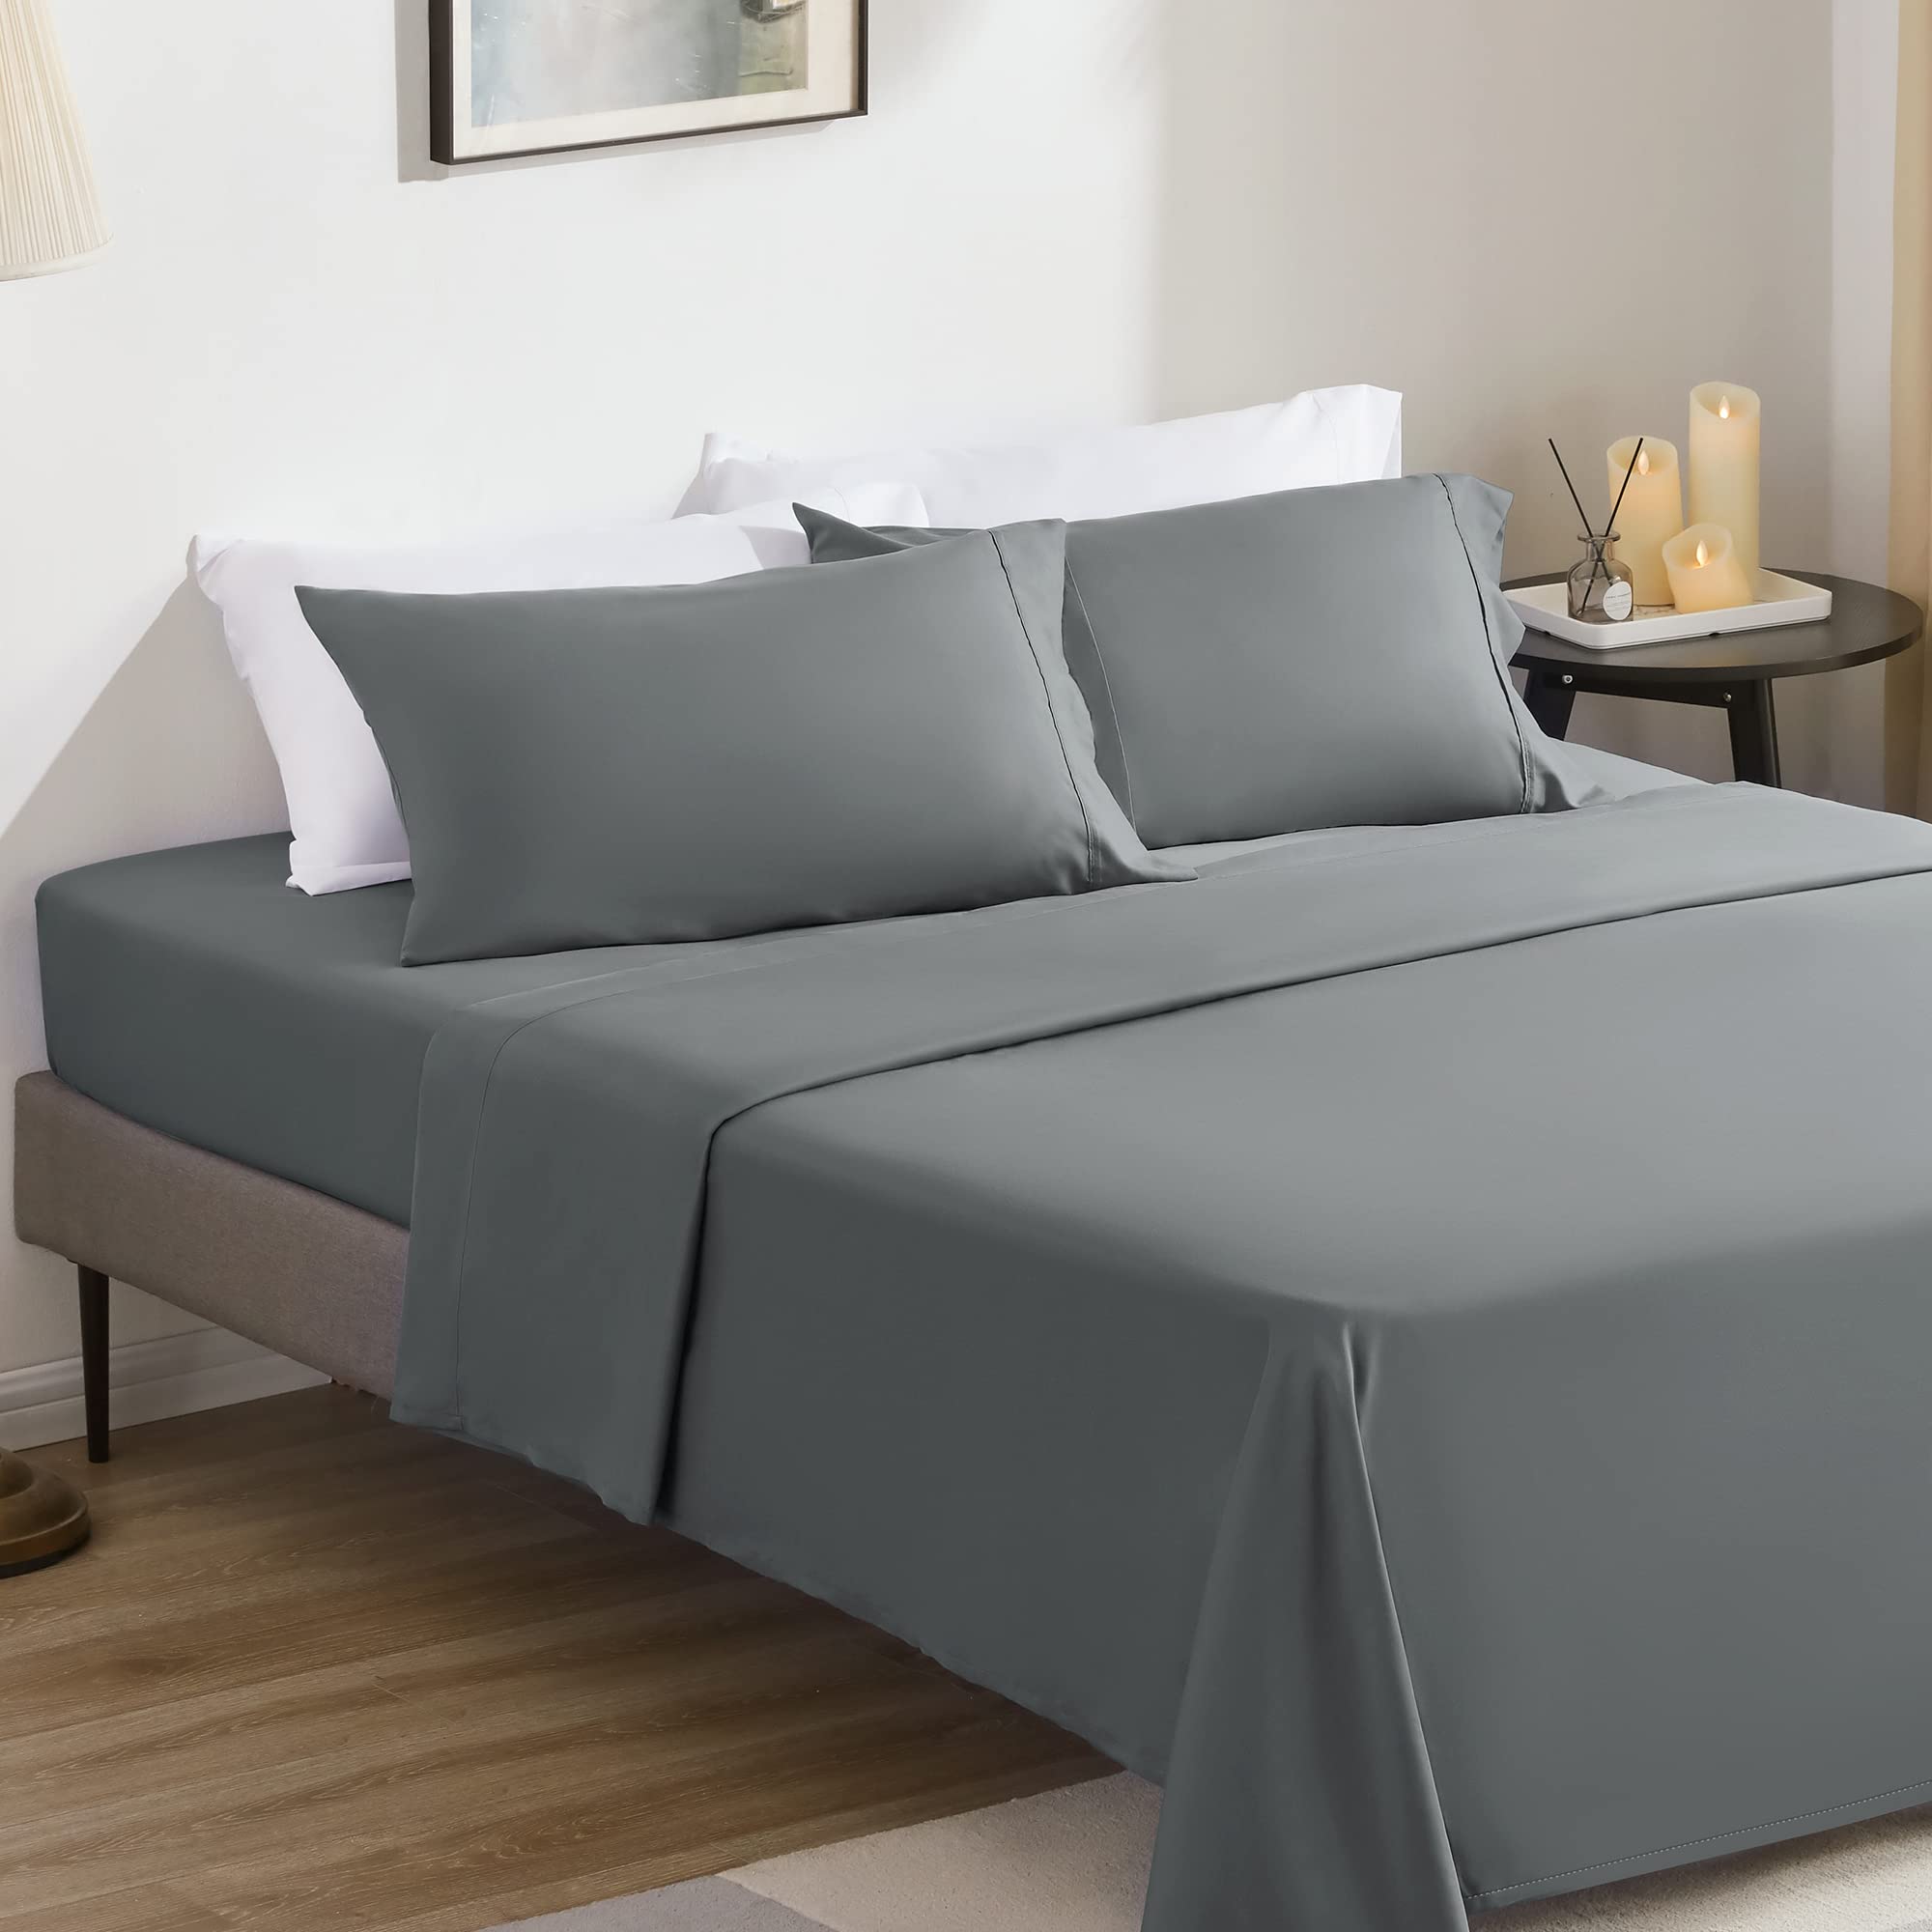 SONIVE Queen Bed Sheets Set Grey 1800 Super Soft Brushed Microfiber 4 Pieces Bedding Sheets & Pillowcases with Fitted Sheet, Deep Pockets Easy Care